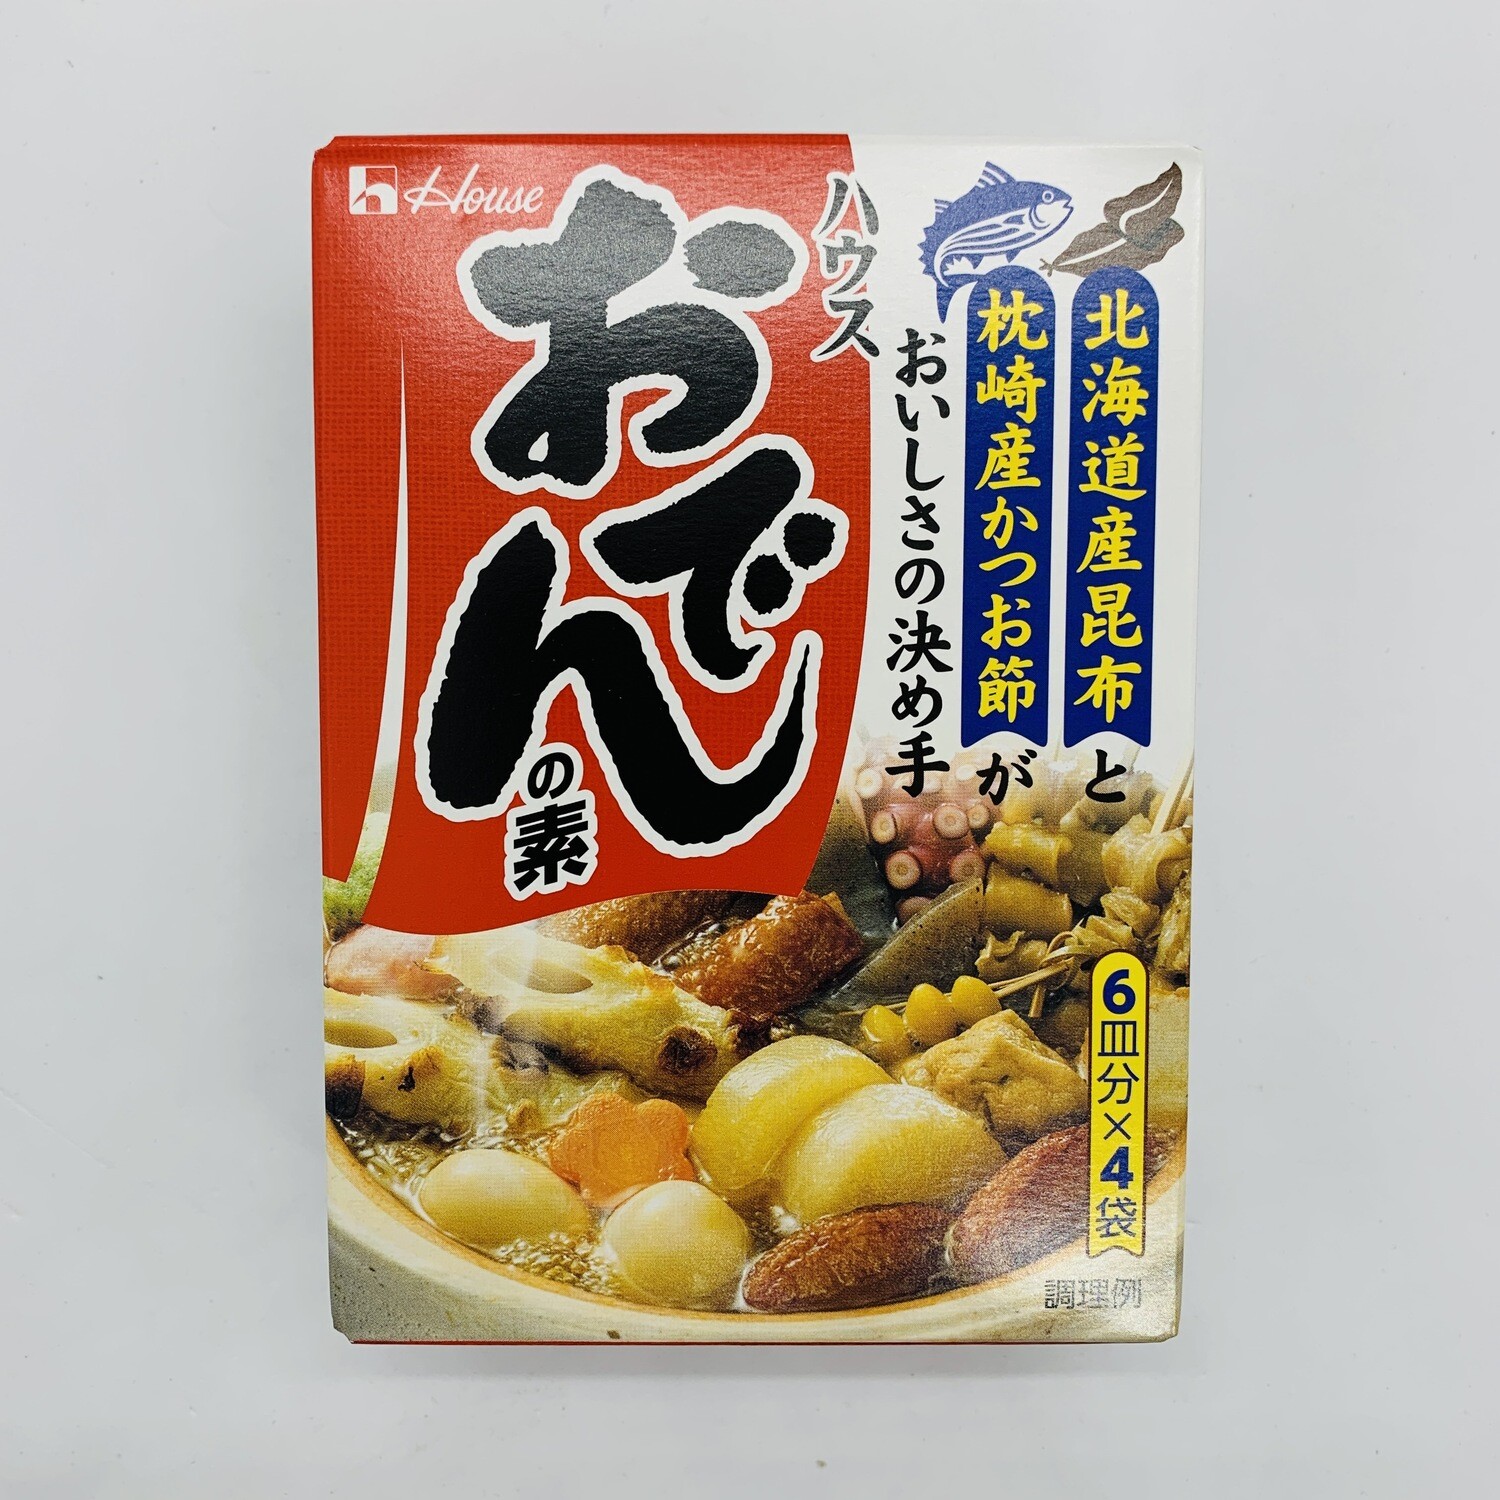 House Oden Seasoning Mix